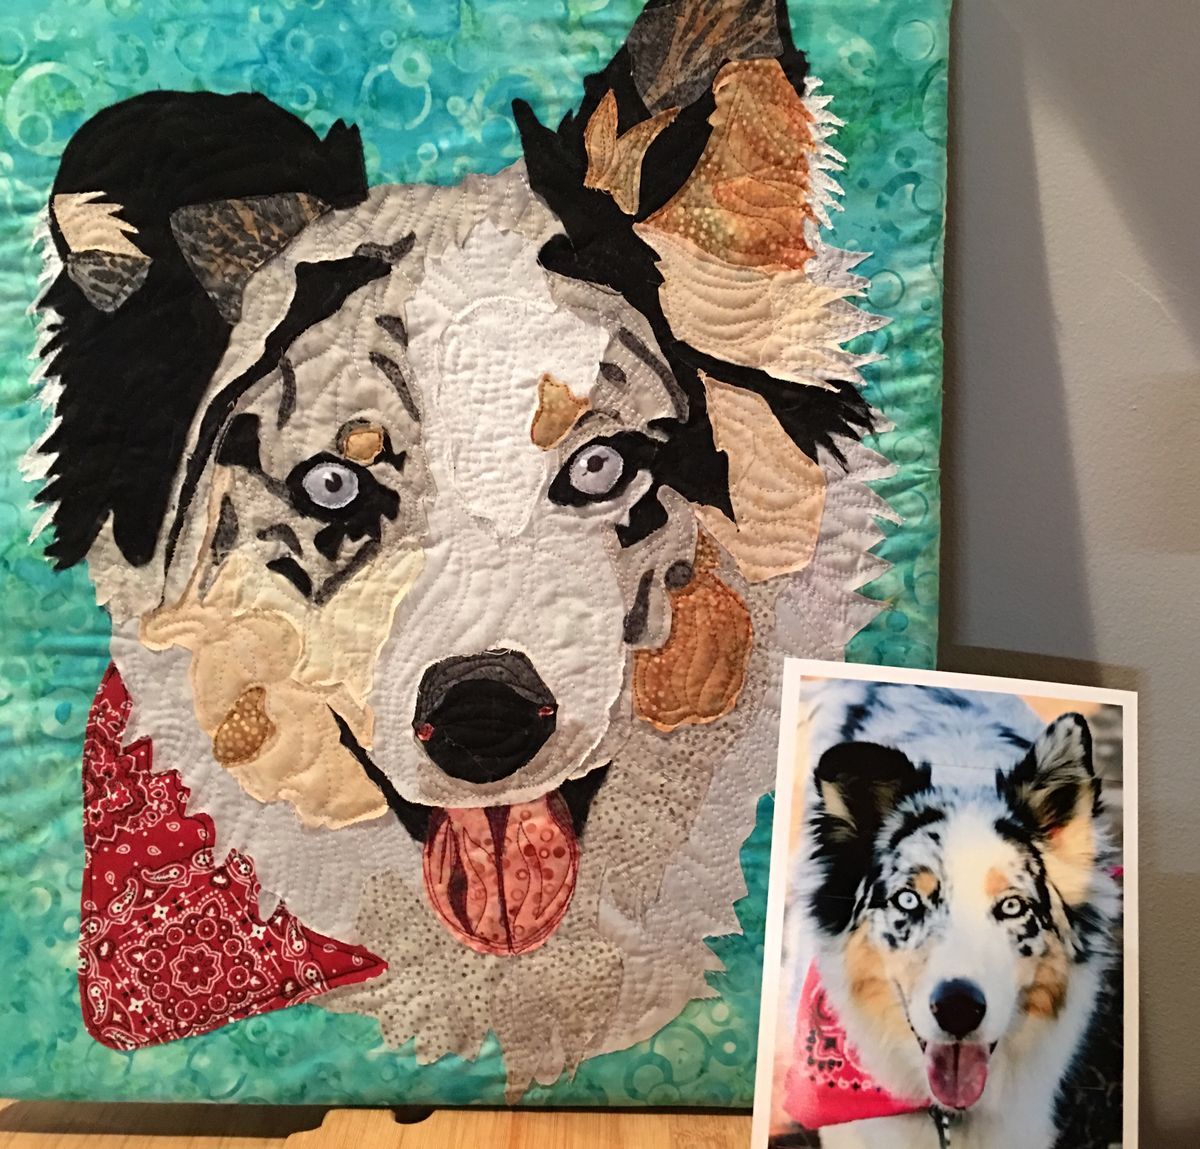 Dog Wall Hanging 20 X 24 | Art Quilts, Animal Quilts, Dog Quilts Within Dog Wall Art (View 15 of 15)